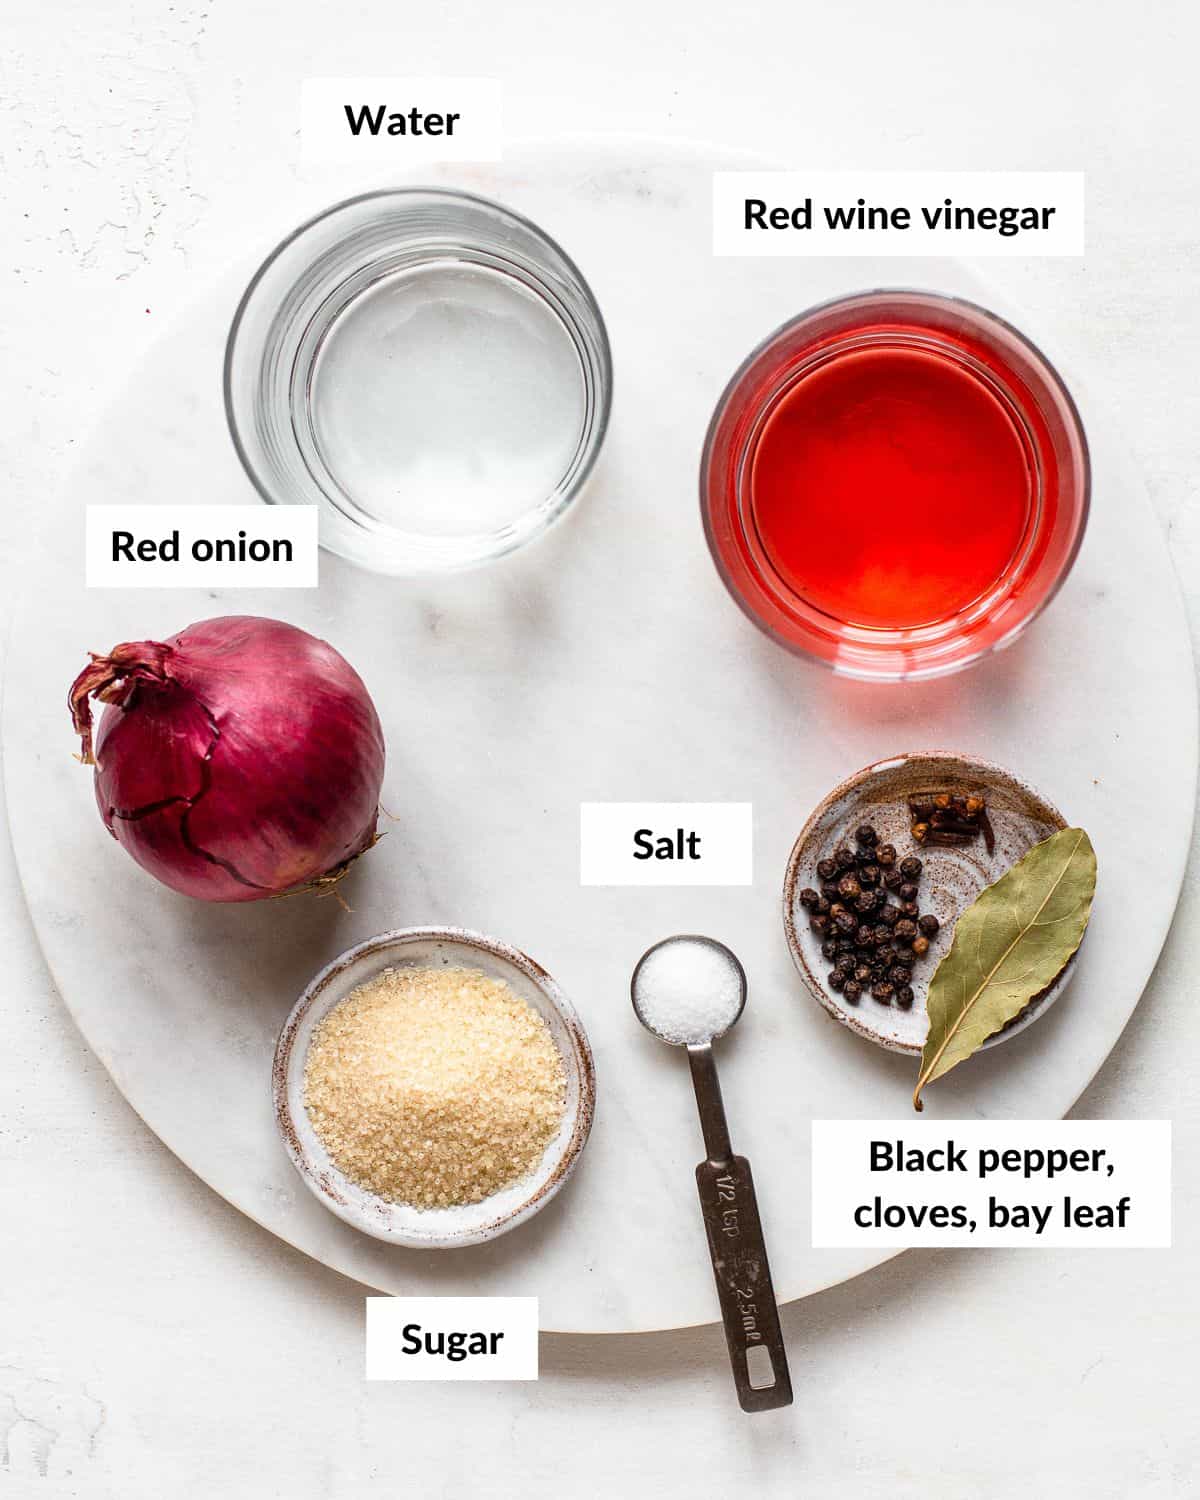 Ingredients for red wine vinegar pickled onions in small jars with descriptive labels.